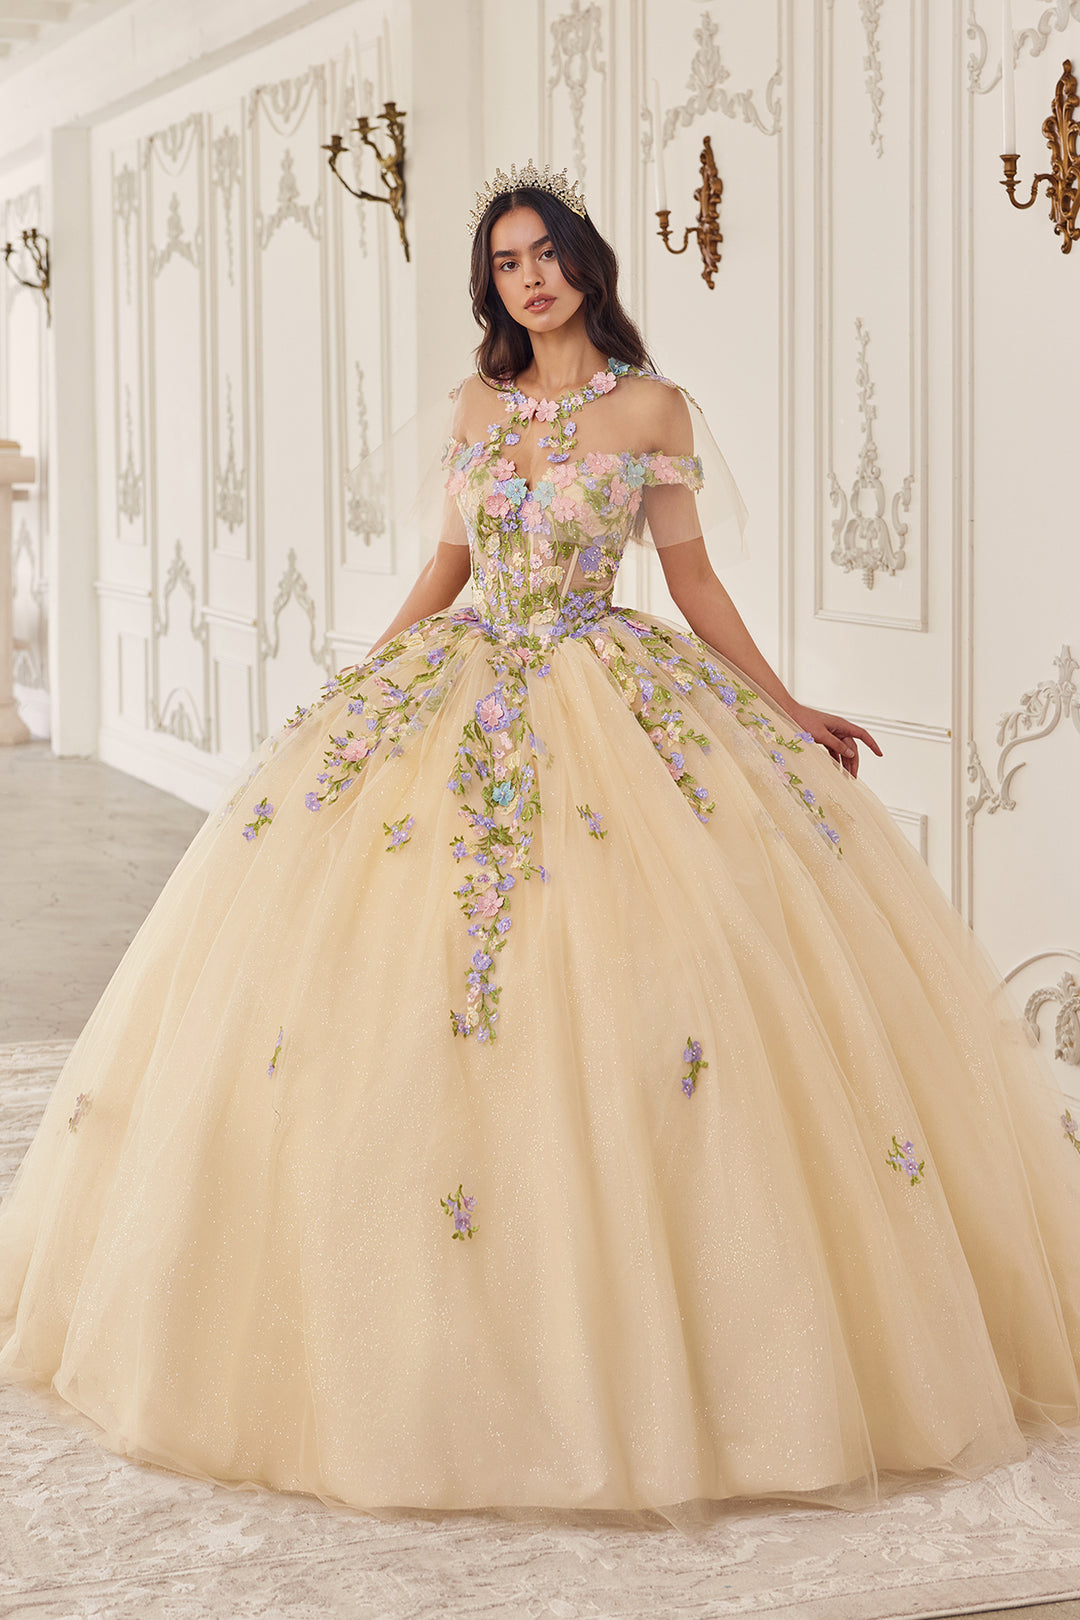 Multi-Color Floral Off Shoulder Ball Gown by Ladivine 15724